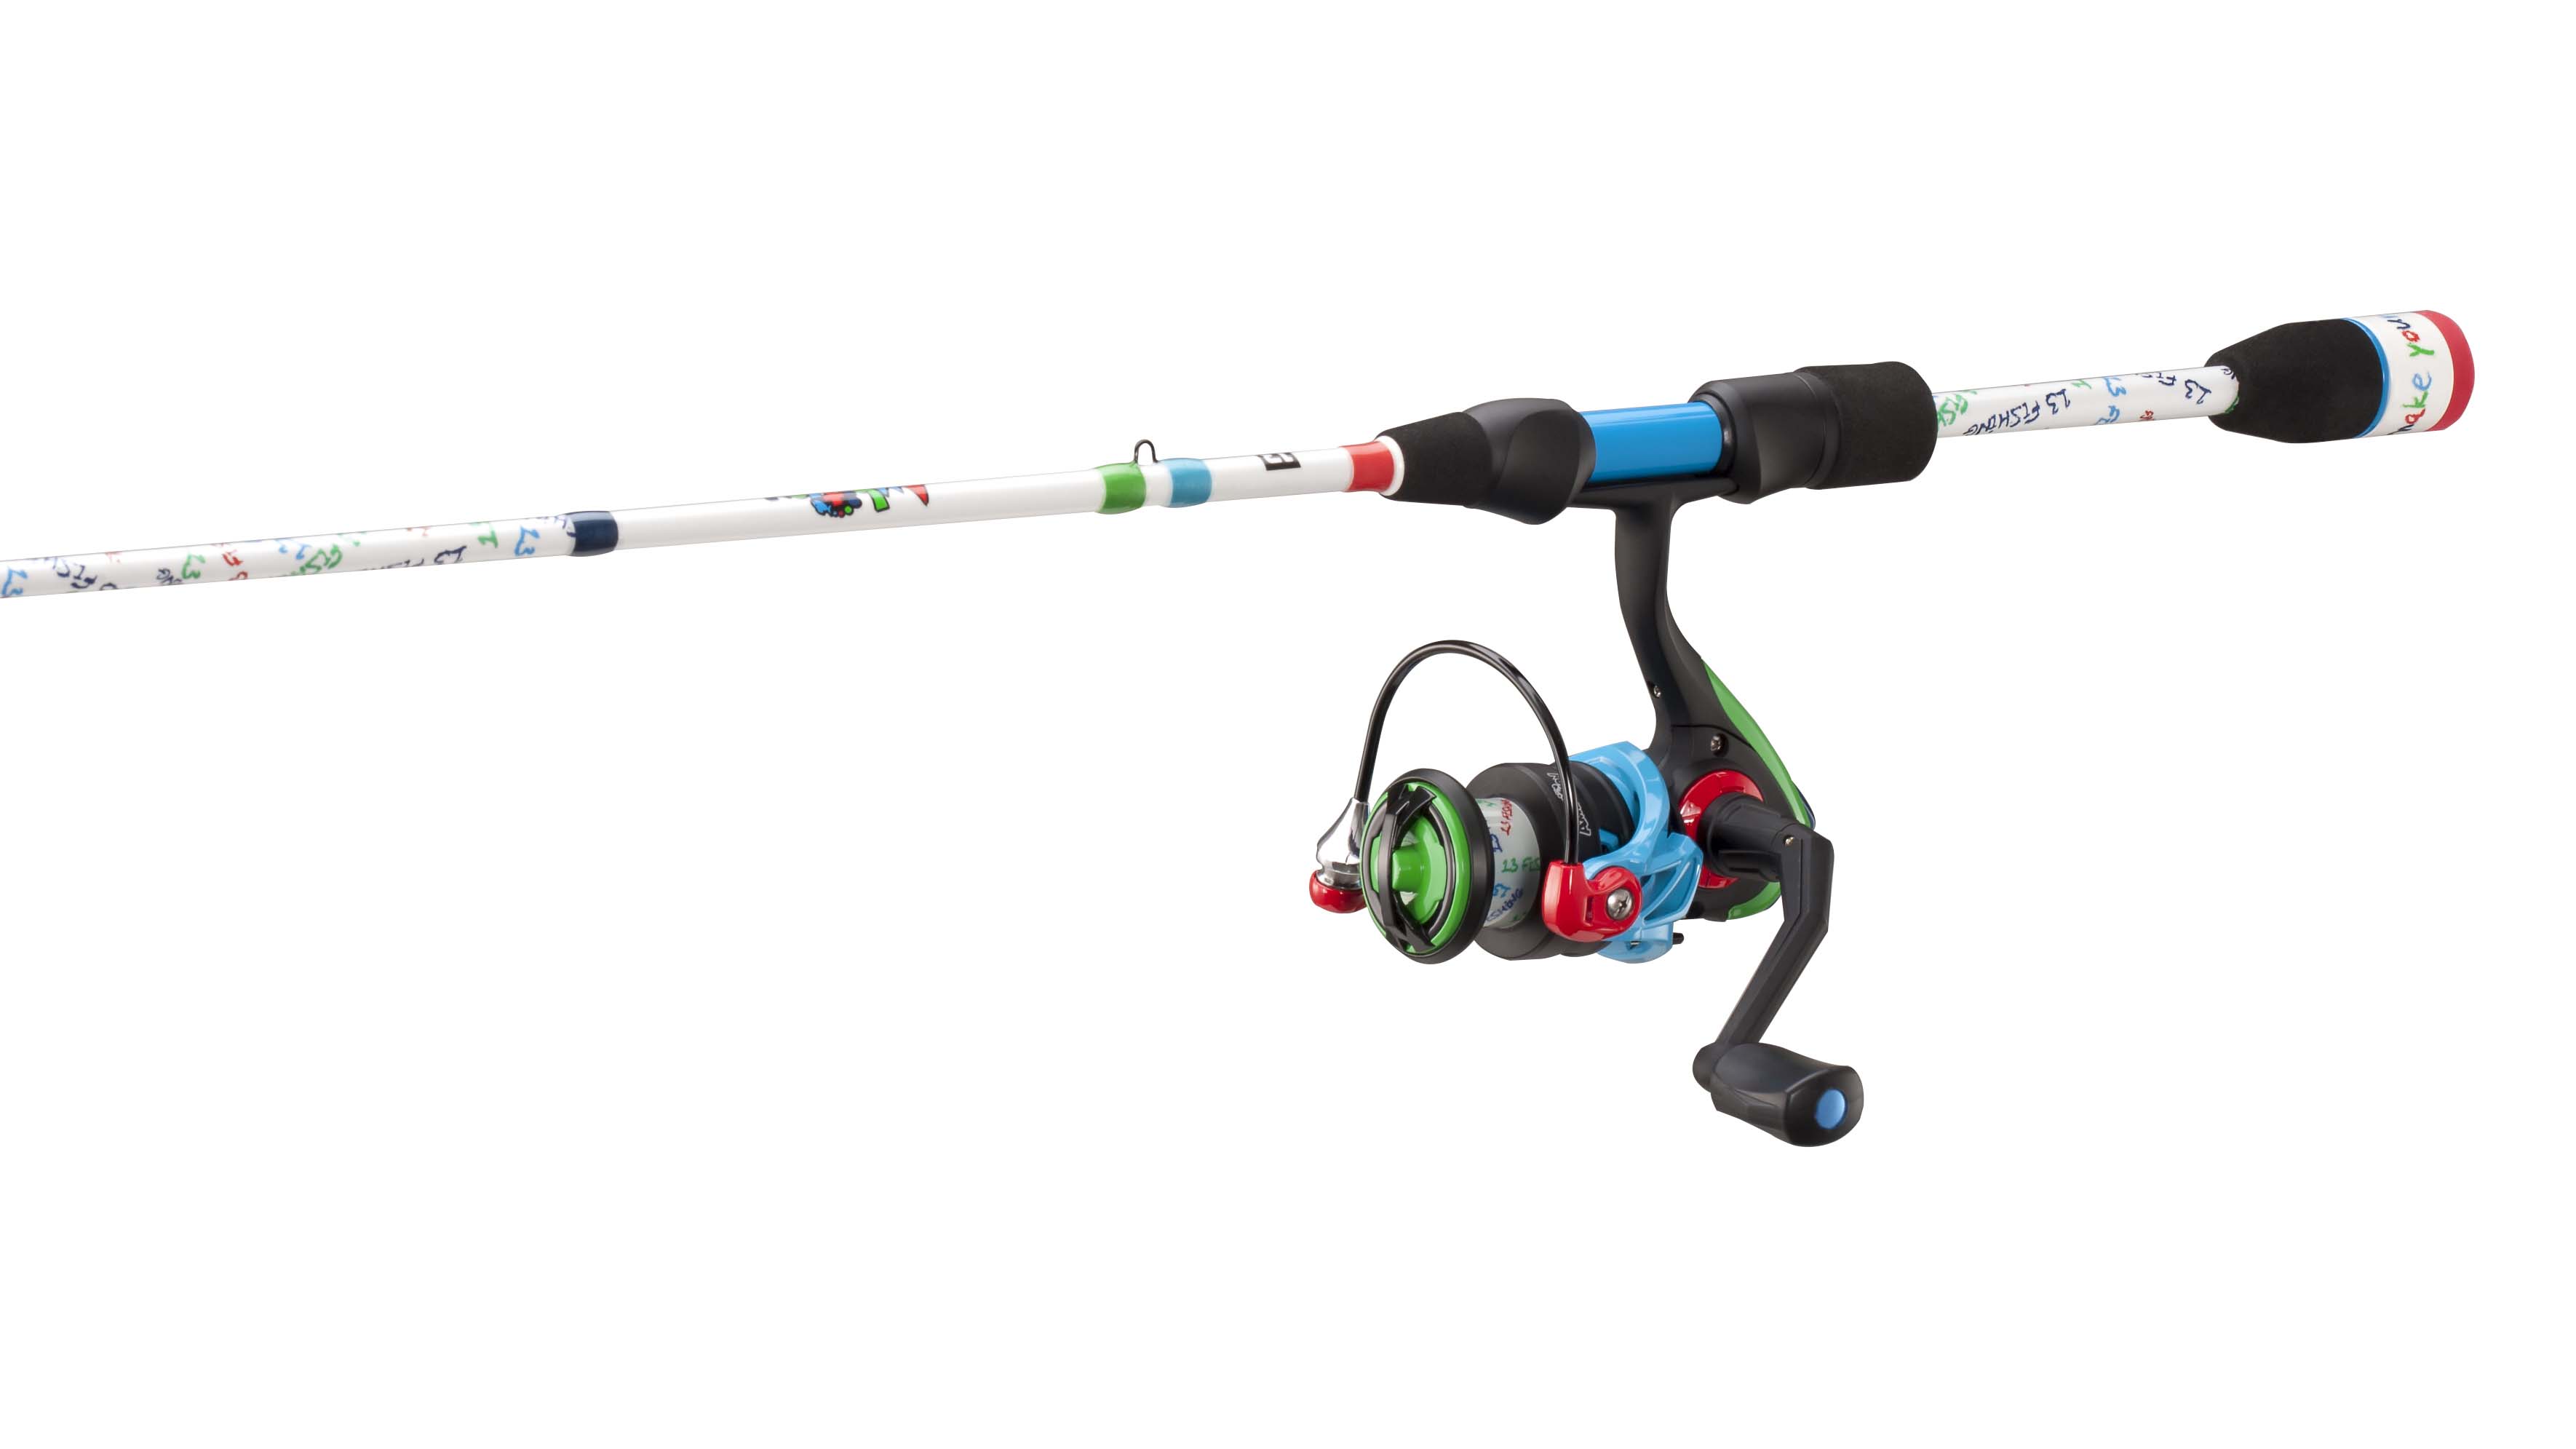 13 Fishing Ambition 4ft6in SP Combo 1000 Reel Fast Crayon